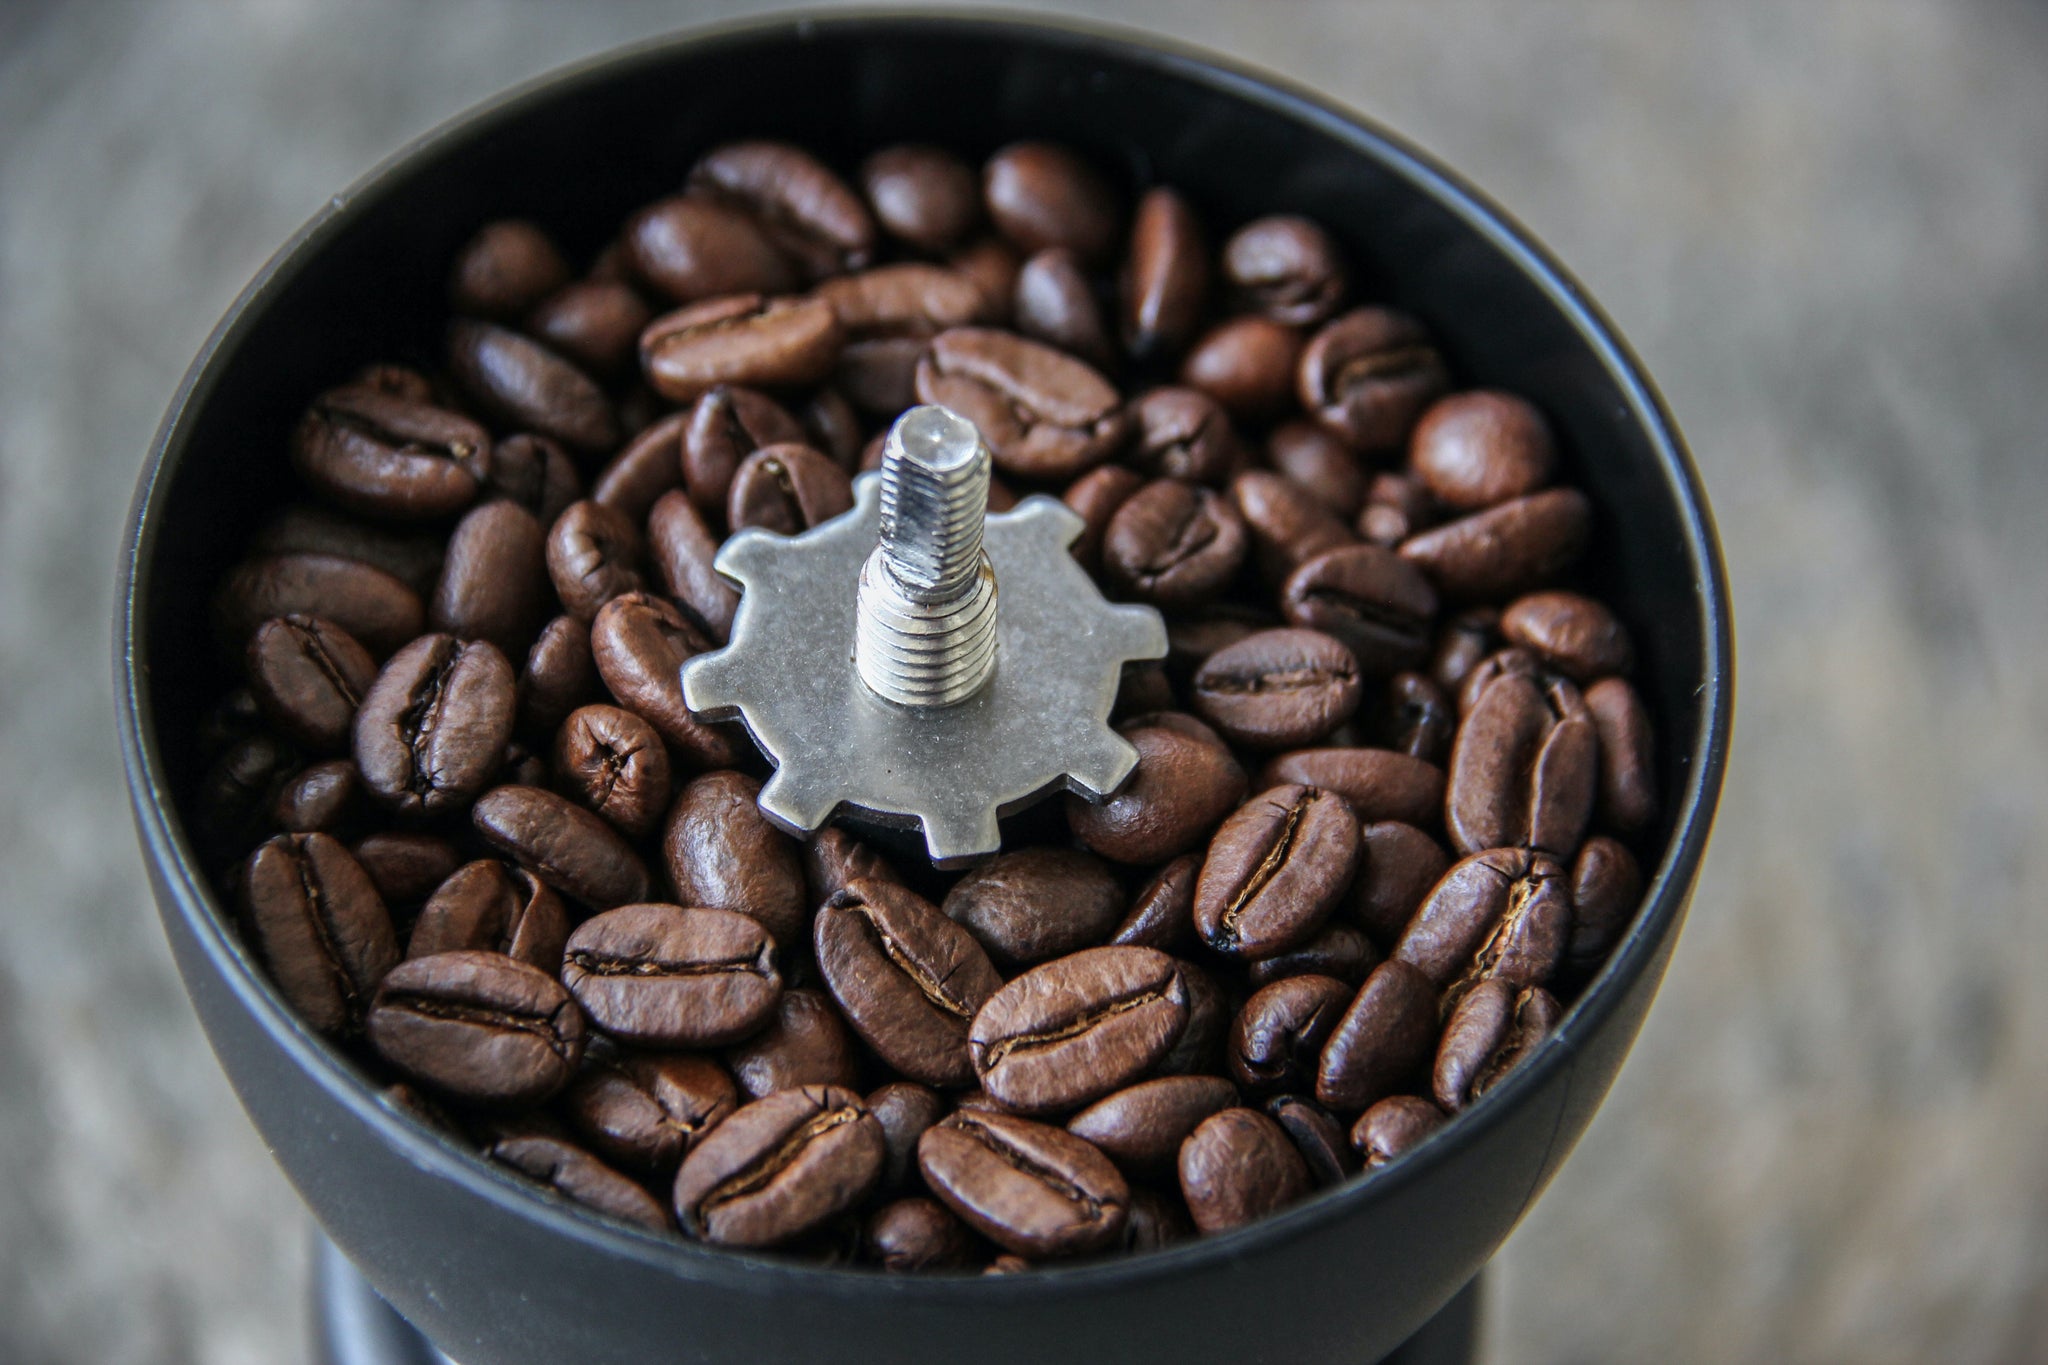 What to Look for When Purchasing Your First Coffee Grinder – Bean